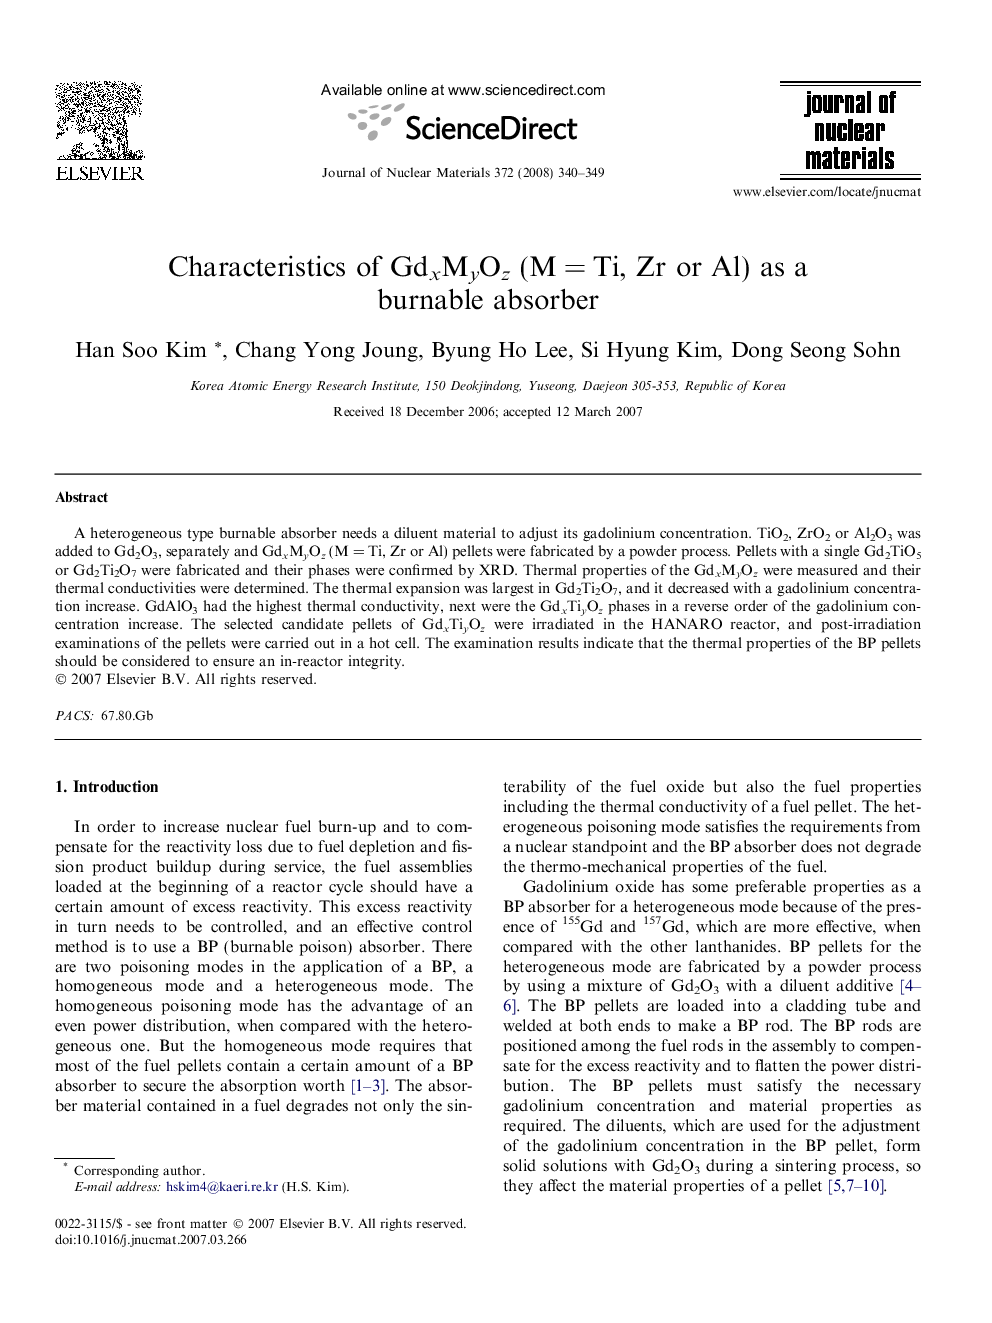 Characteristics of GdxMyOz (M = Ti, Zr or Al) as a burnable absorber